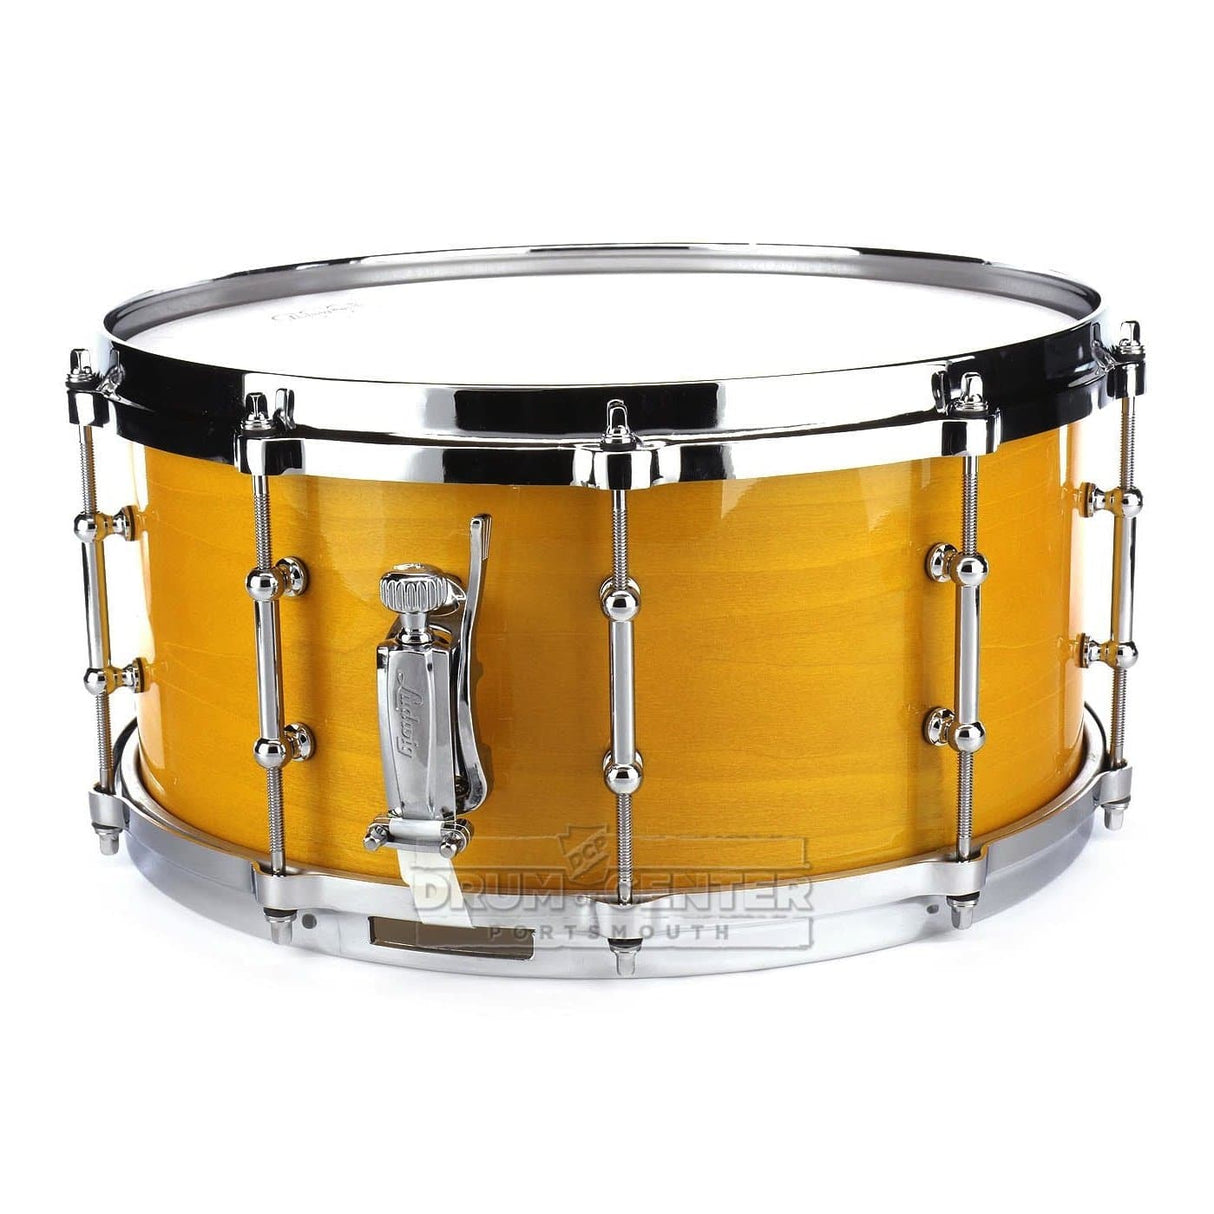 Ludwig Limited Edition Solid Ply Tulipwood Snare Drum 14x6.5 Golden Slumbers